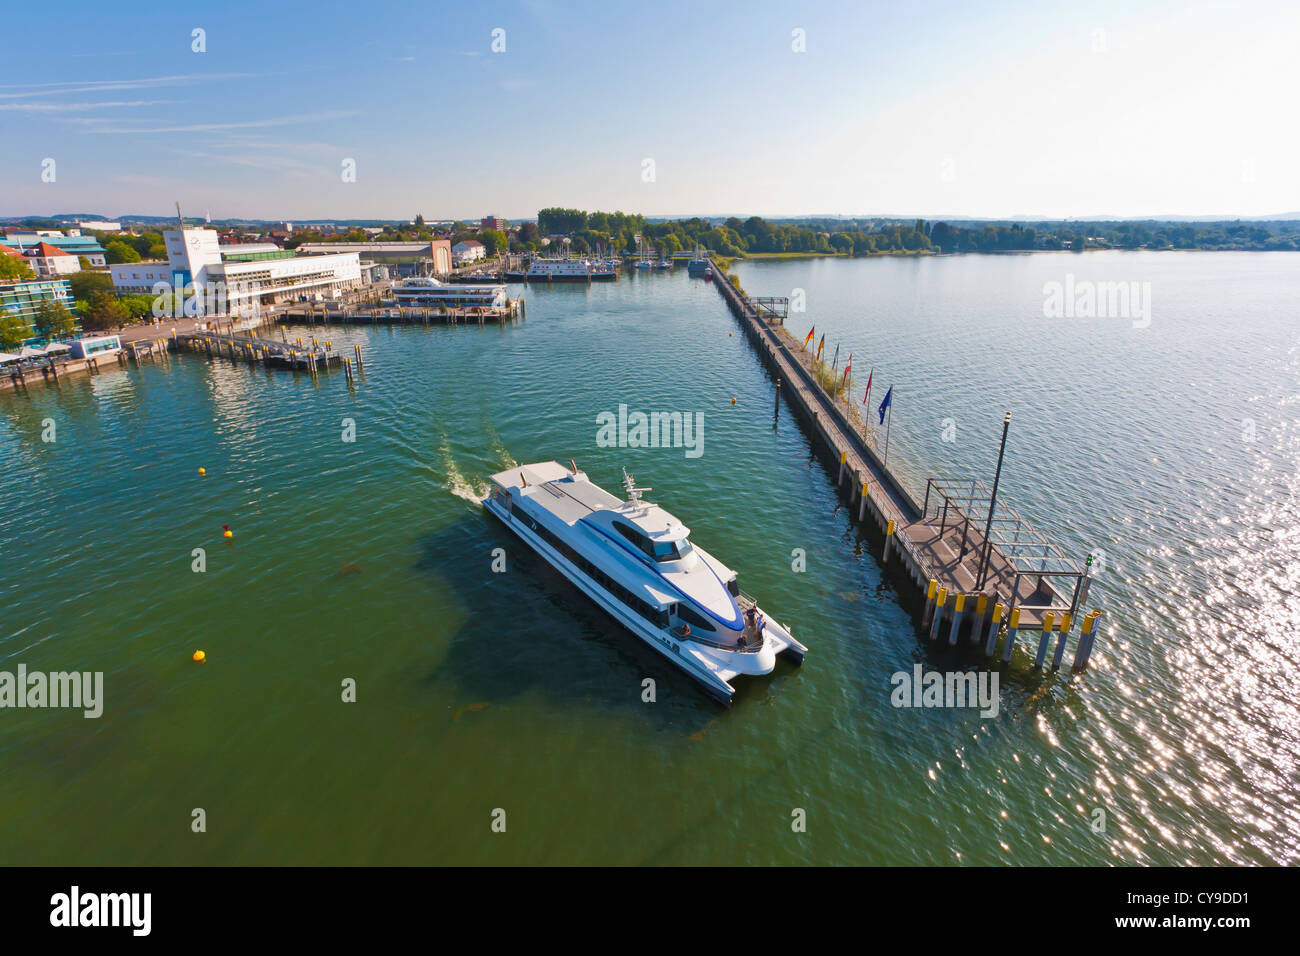 SEABUS LEAVING THE HARBOUR IN FRIEDRICHSHAFEN, LAKE CONSTANCE, BADEN-WURTTEMBERG, GERMANY Stock Photo